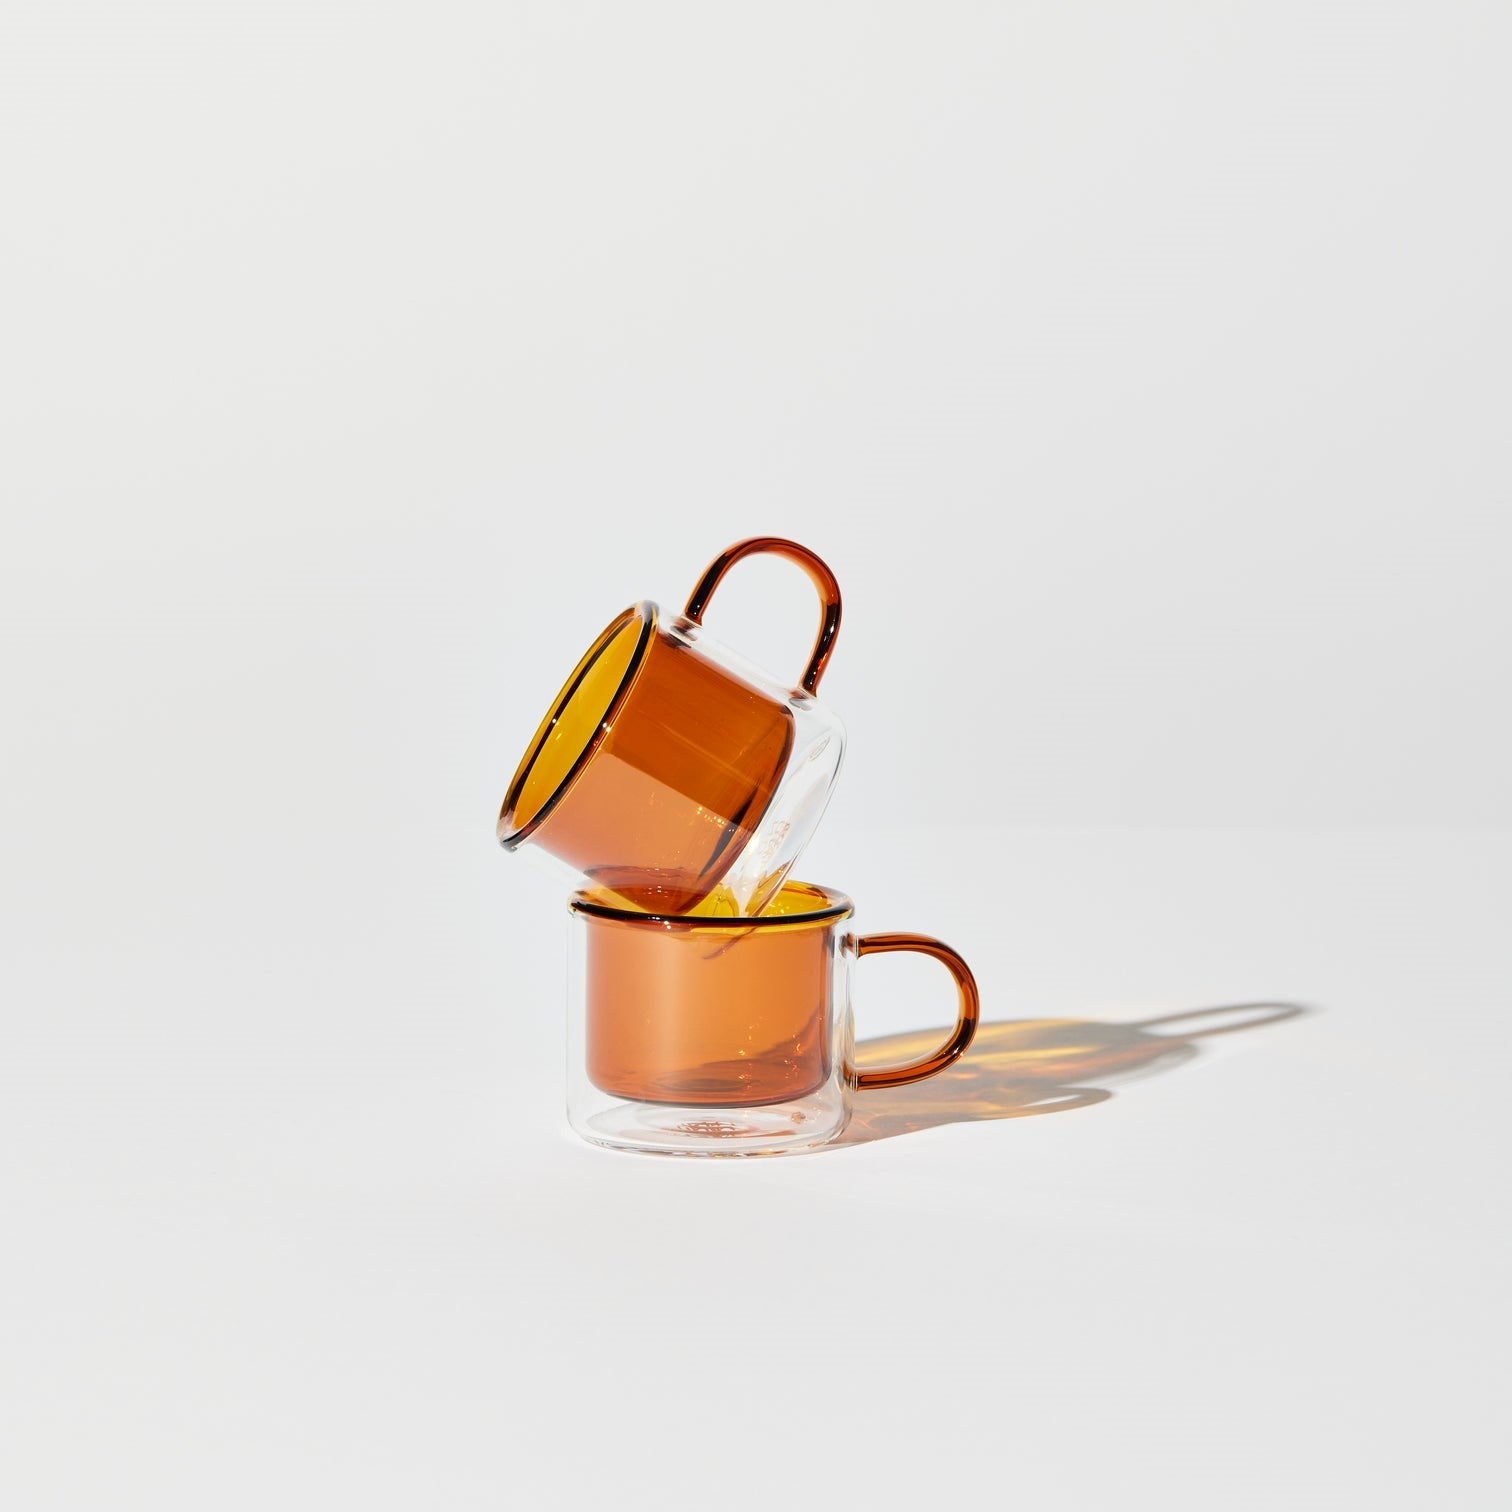 HOUSE OF NUNU SHORTY ESPRESSO CUP SET IN AMBER